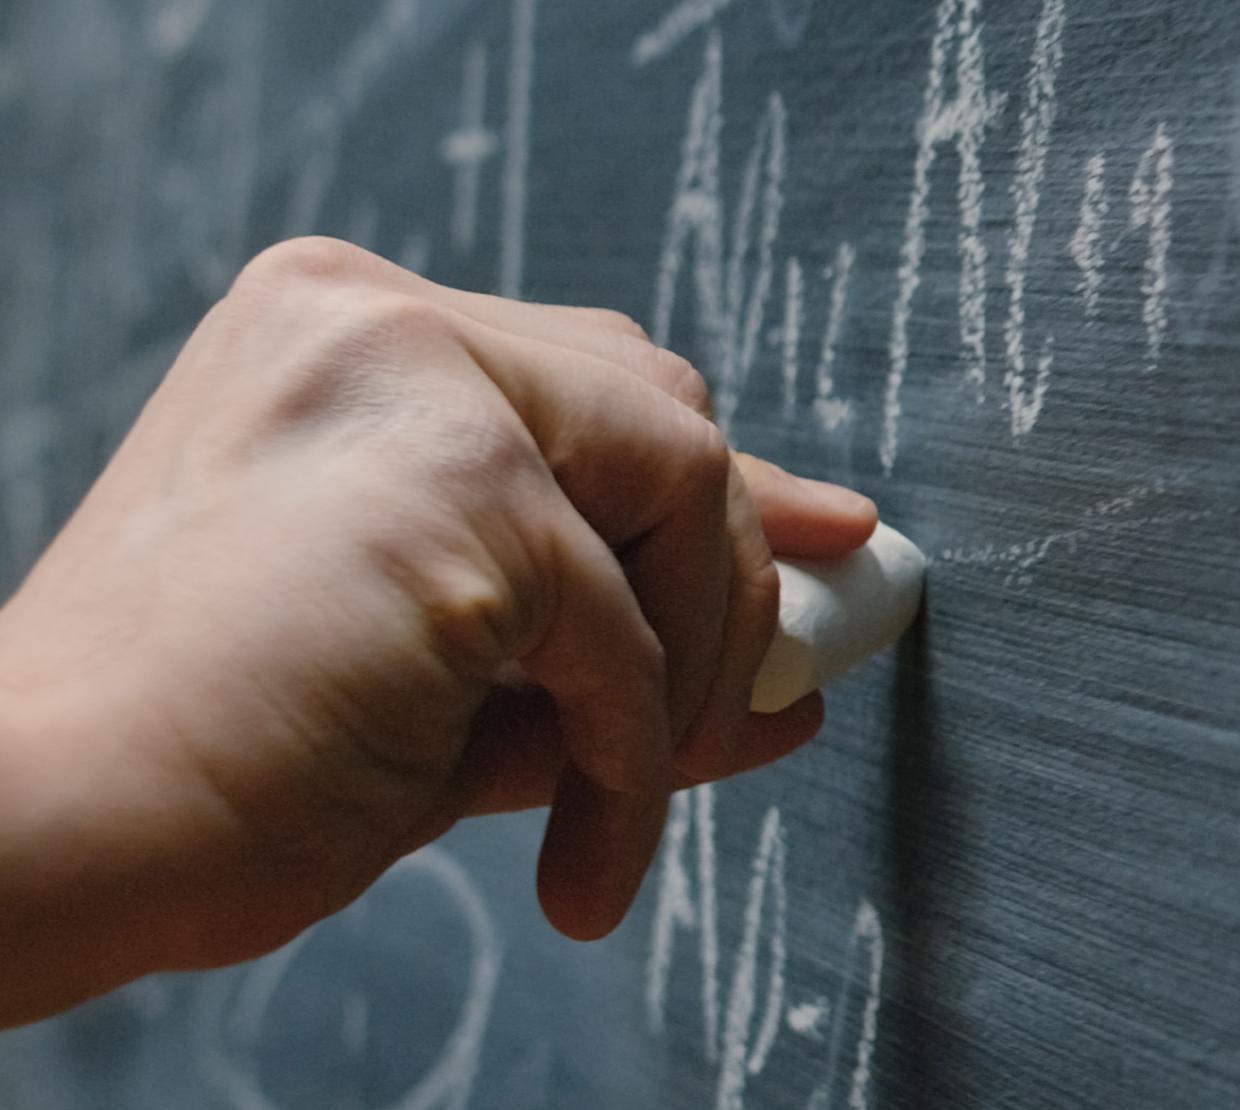 Photo of a hand writing math equations on a chalk board